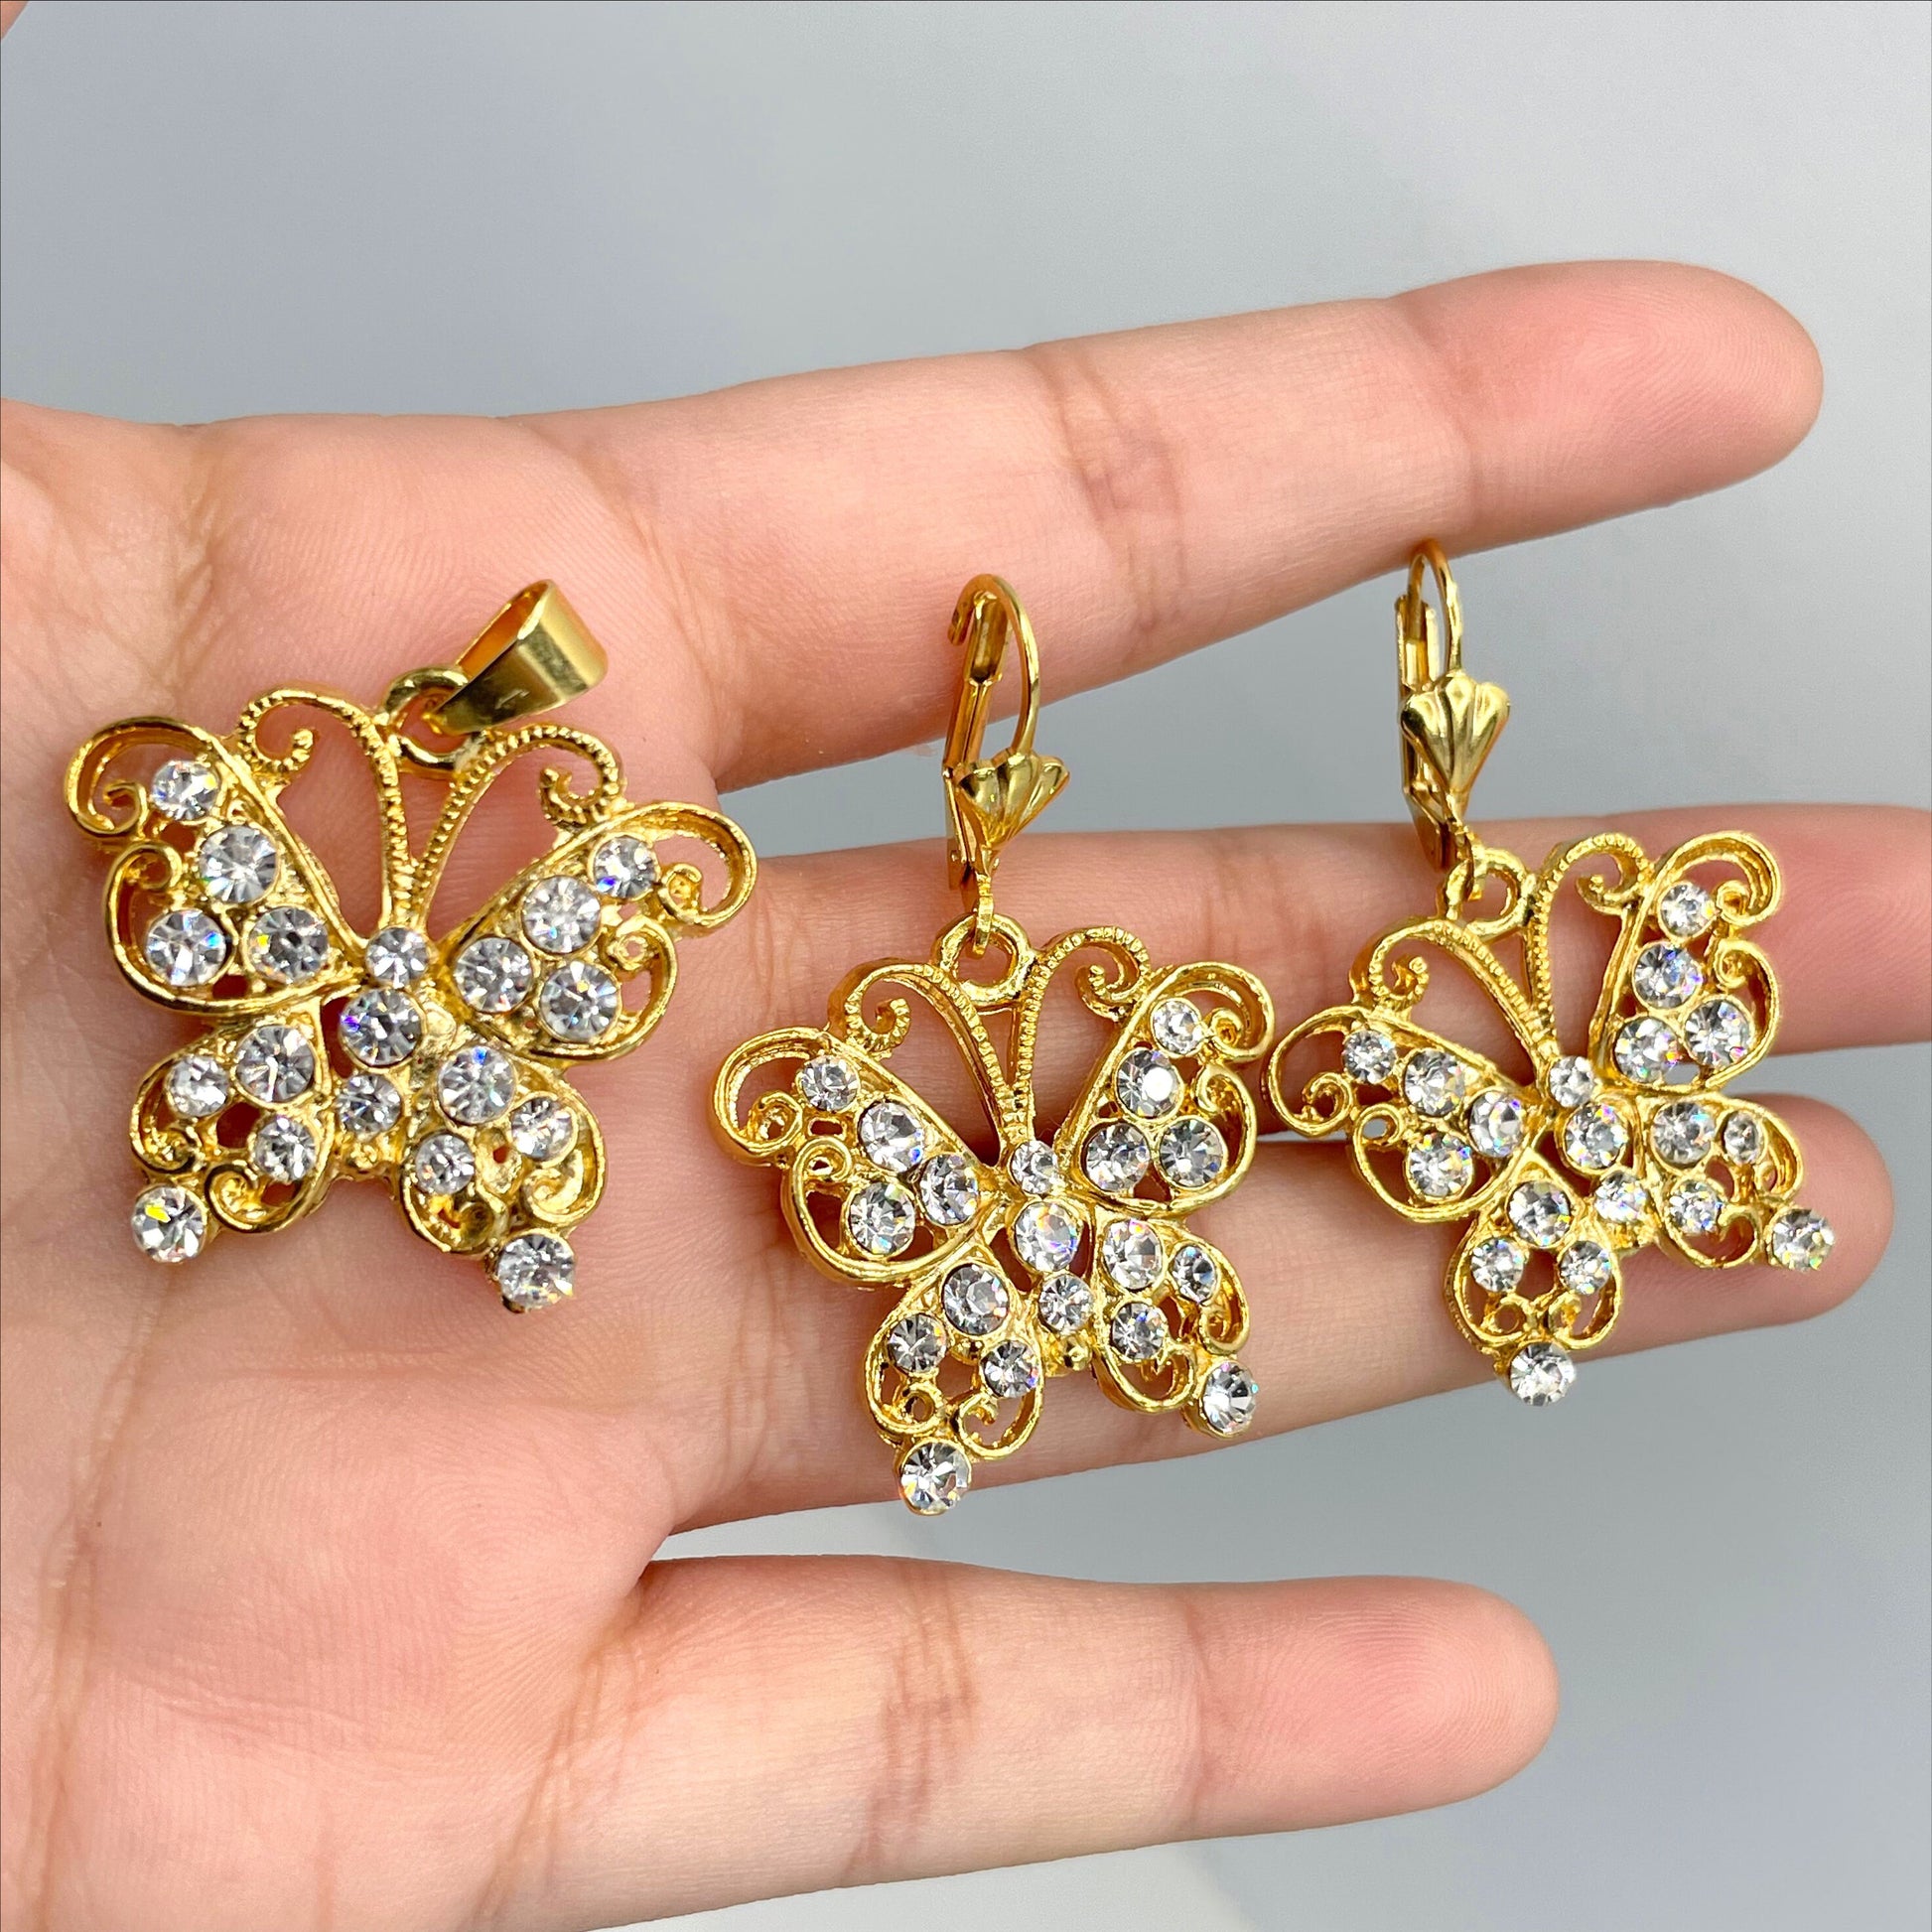 18k Gold Filled Clear Cubic Zirconia Cutout Butterflies Pendant and Earrings Set, Wholesale Jewelry Making Supplies